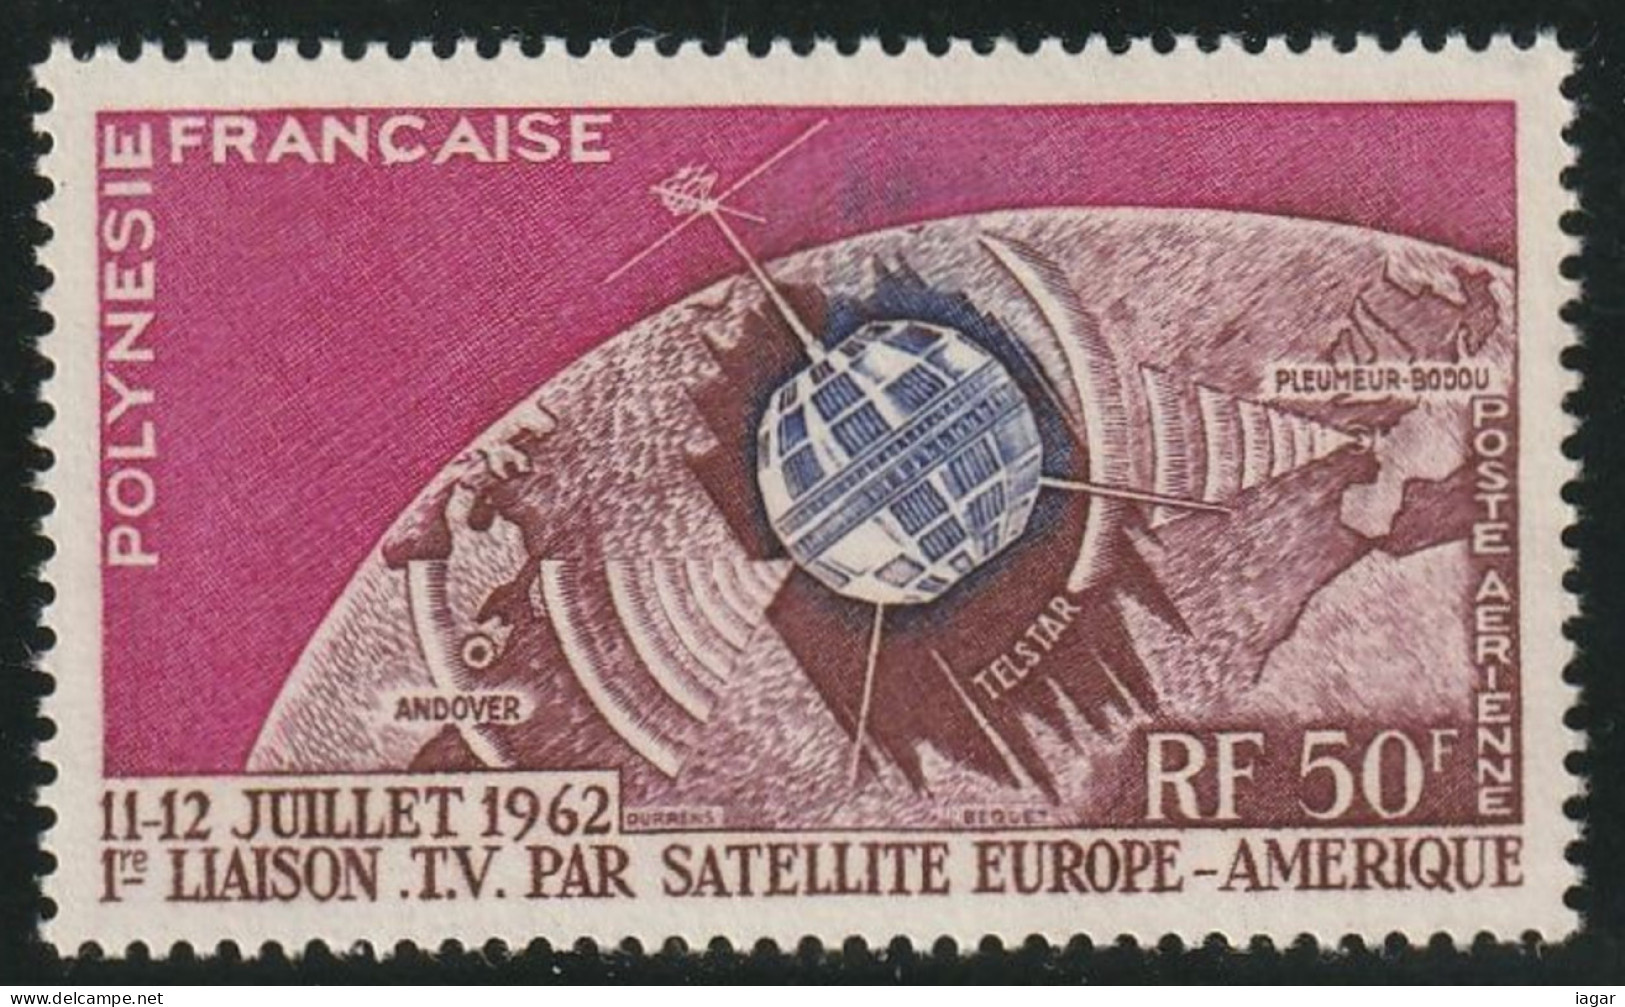 THEMATIC SPACE:  FIRST TV CONNECTION BY EUROPE-AMERICA SATELLITE  - POLYNESIA - Oceania